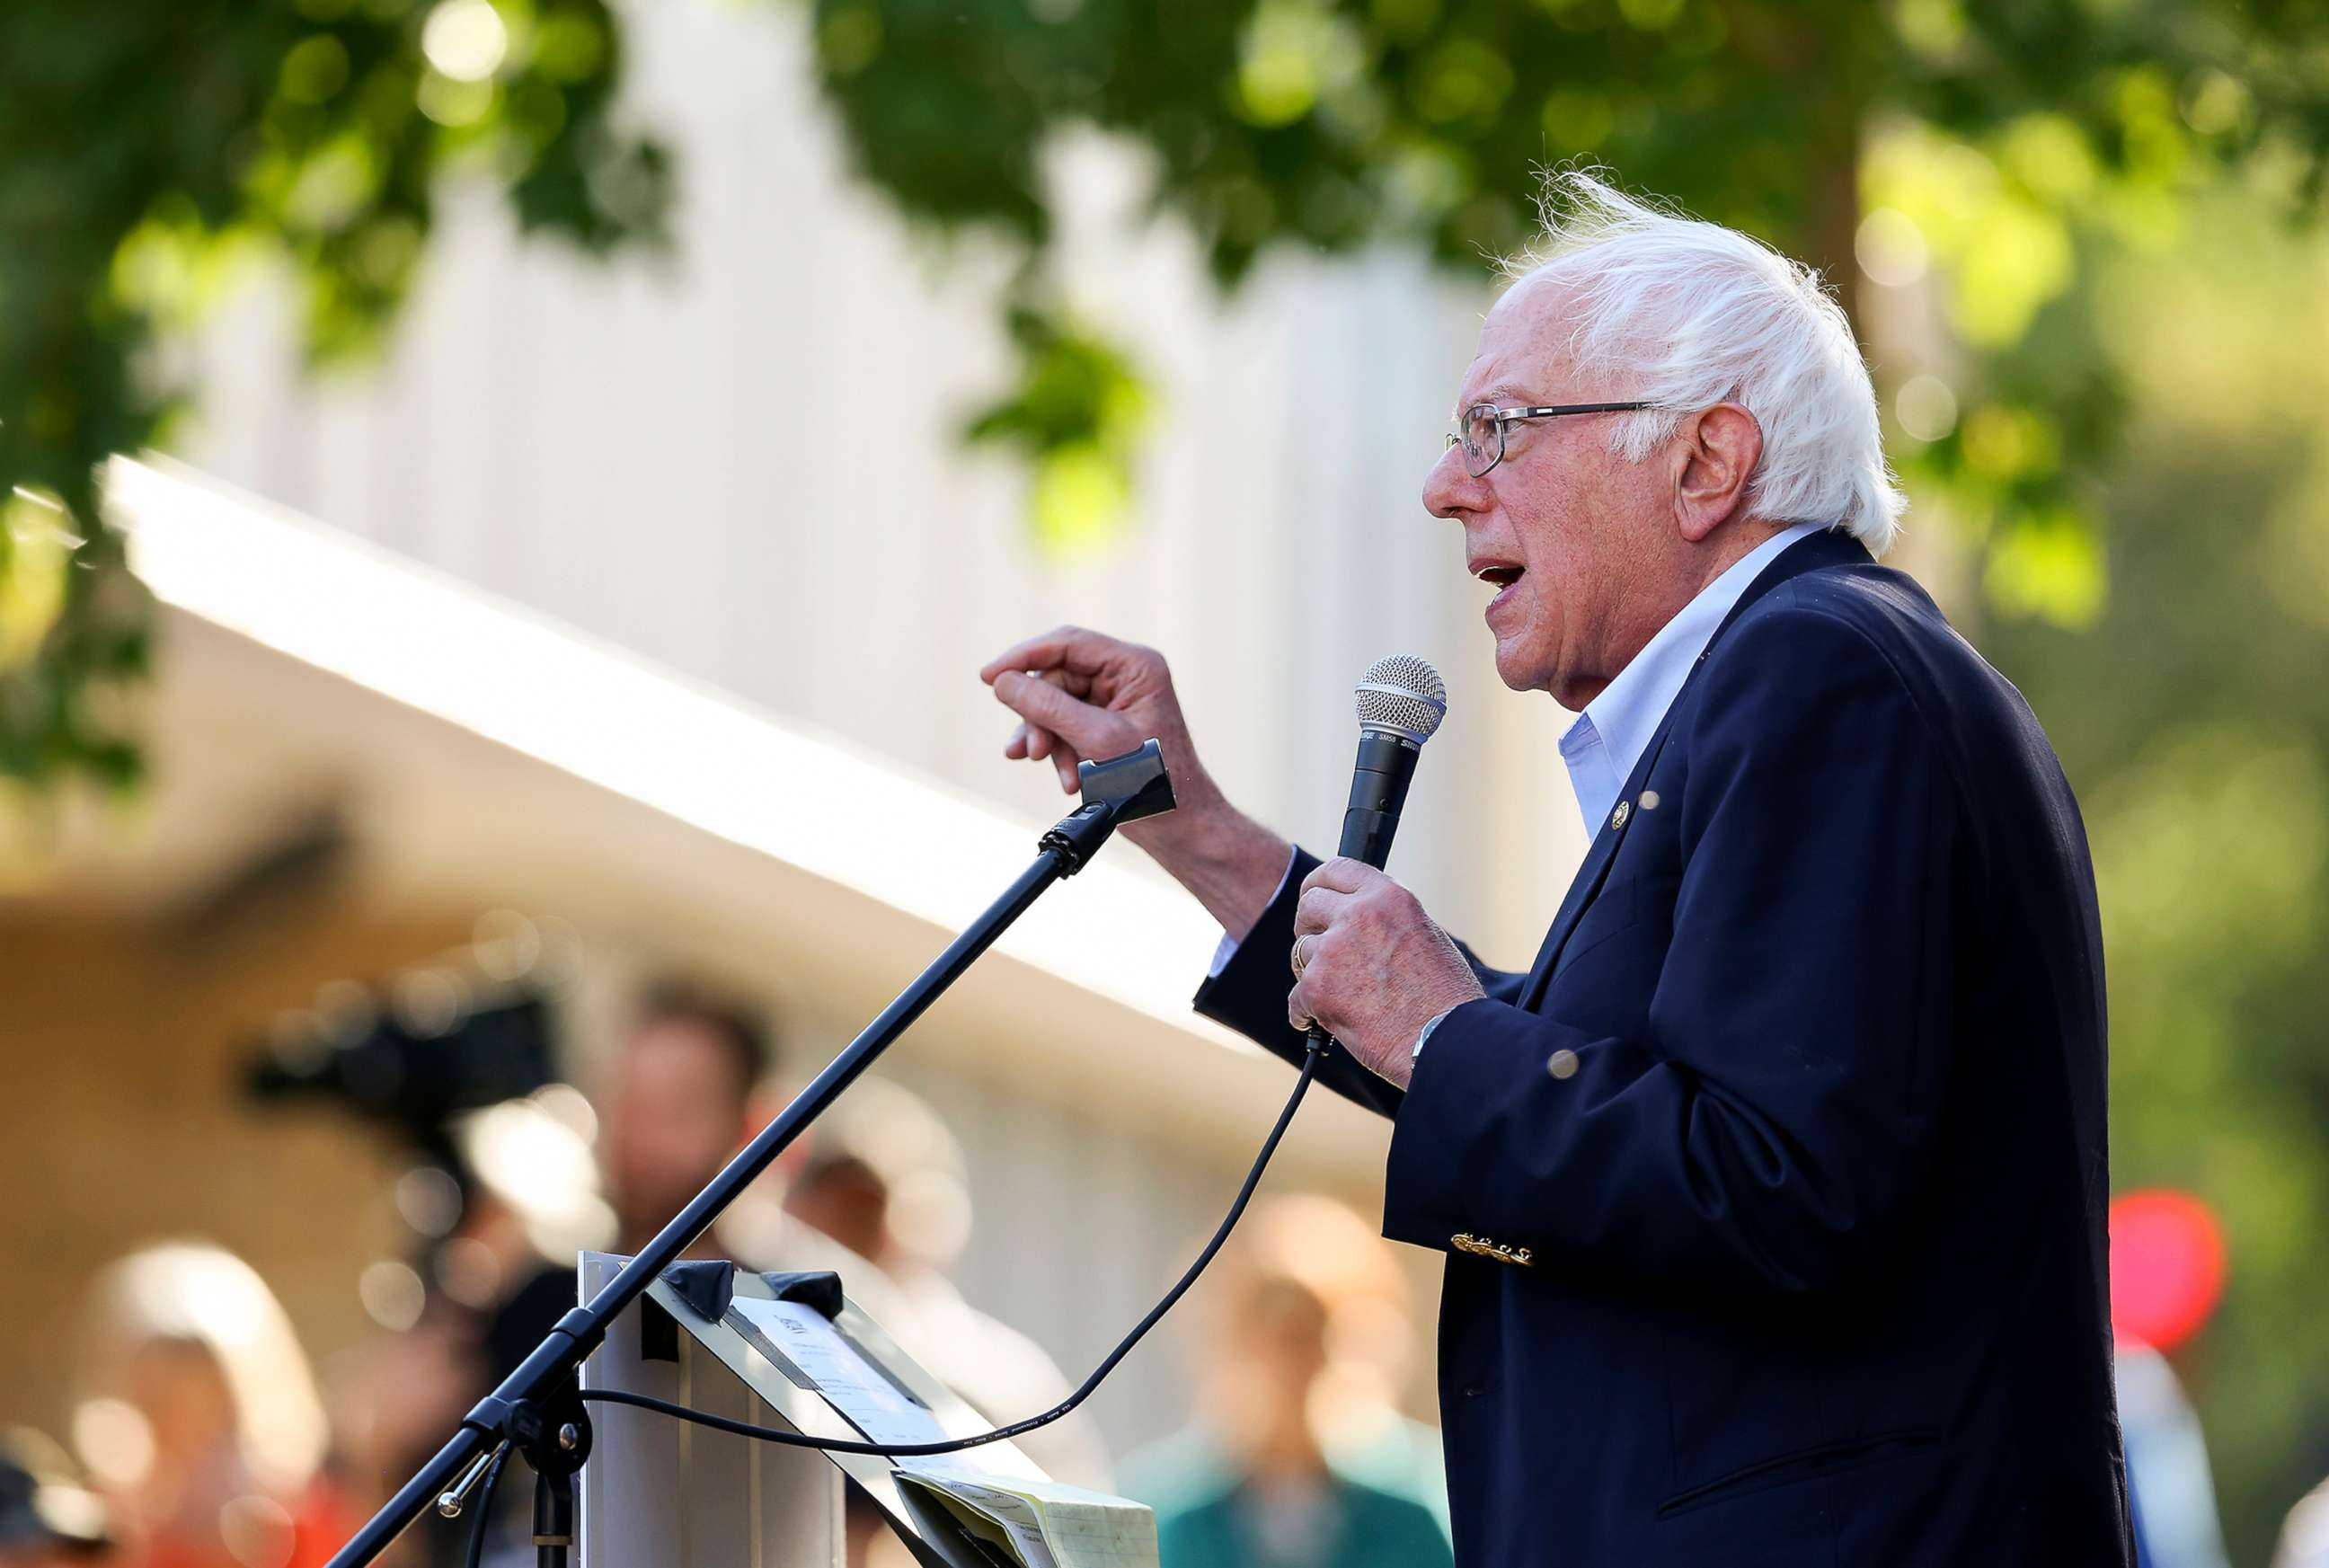 PHOTO: Democratic presidential candidate Sen. Bernie Sanders speaks during a brief campaign stop at Town Clock Plaza in Dubuque, Iowa, Sept. 23, 2019.